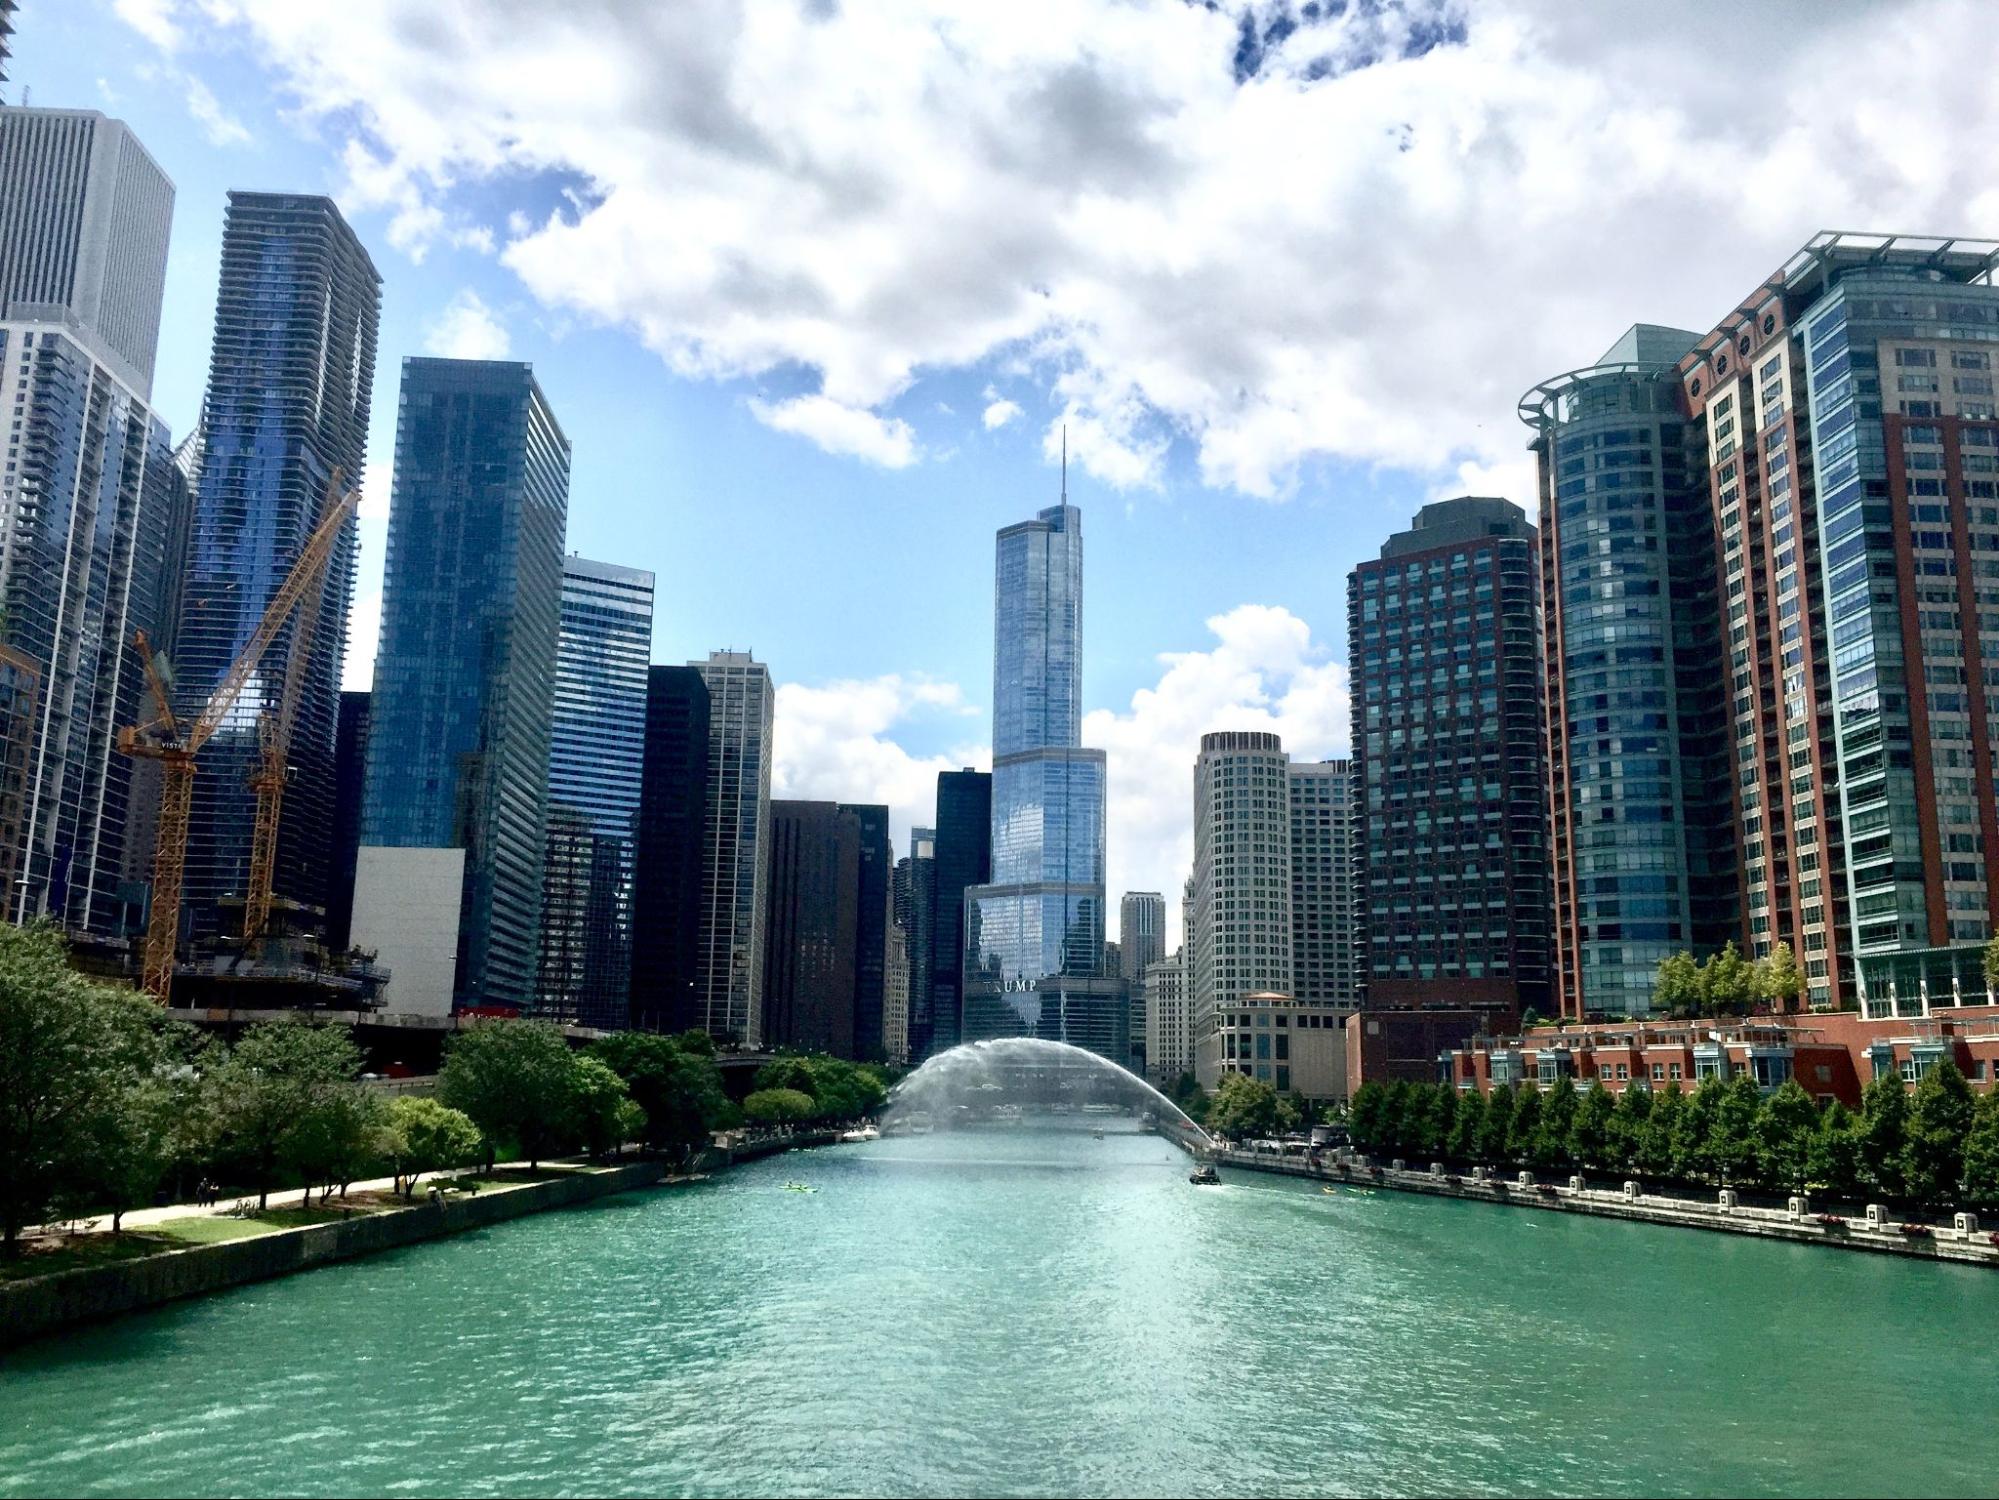 Our Guide to the Best Neighborhoods in Chicago